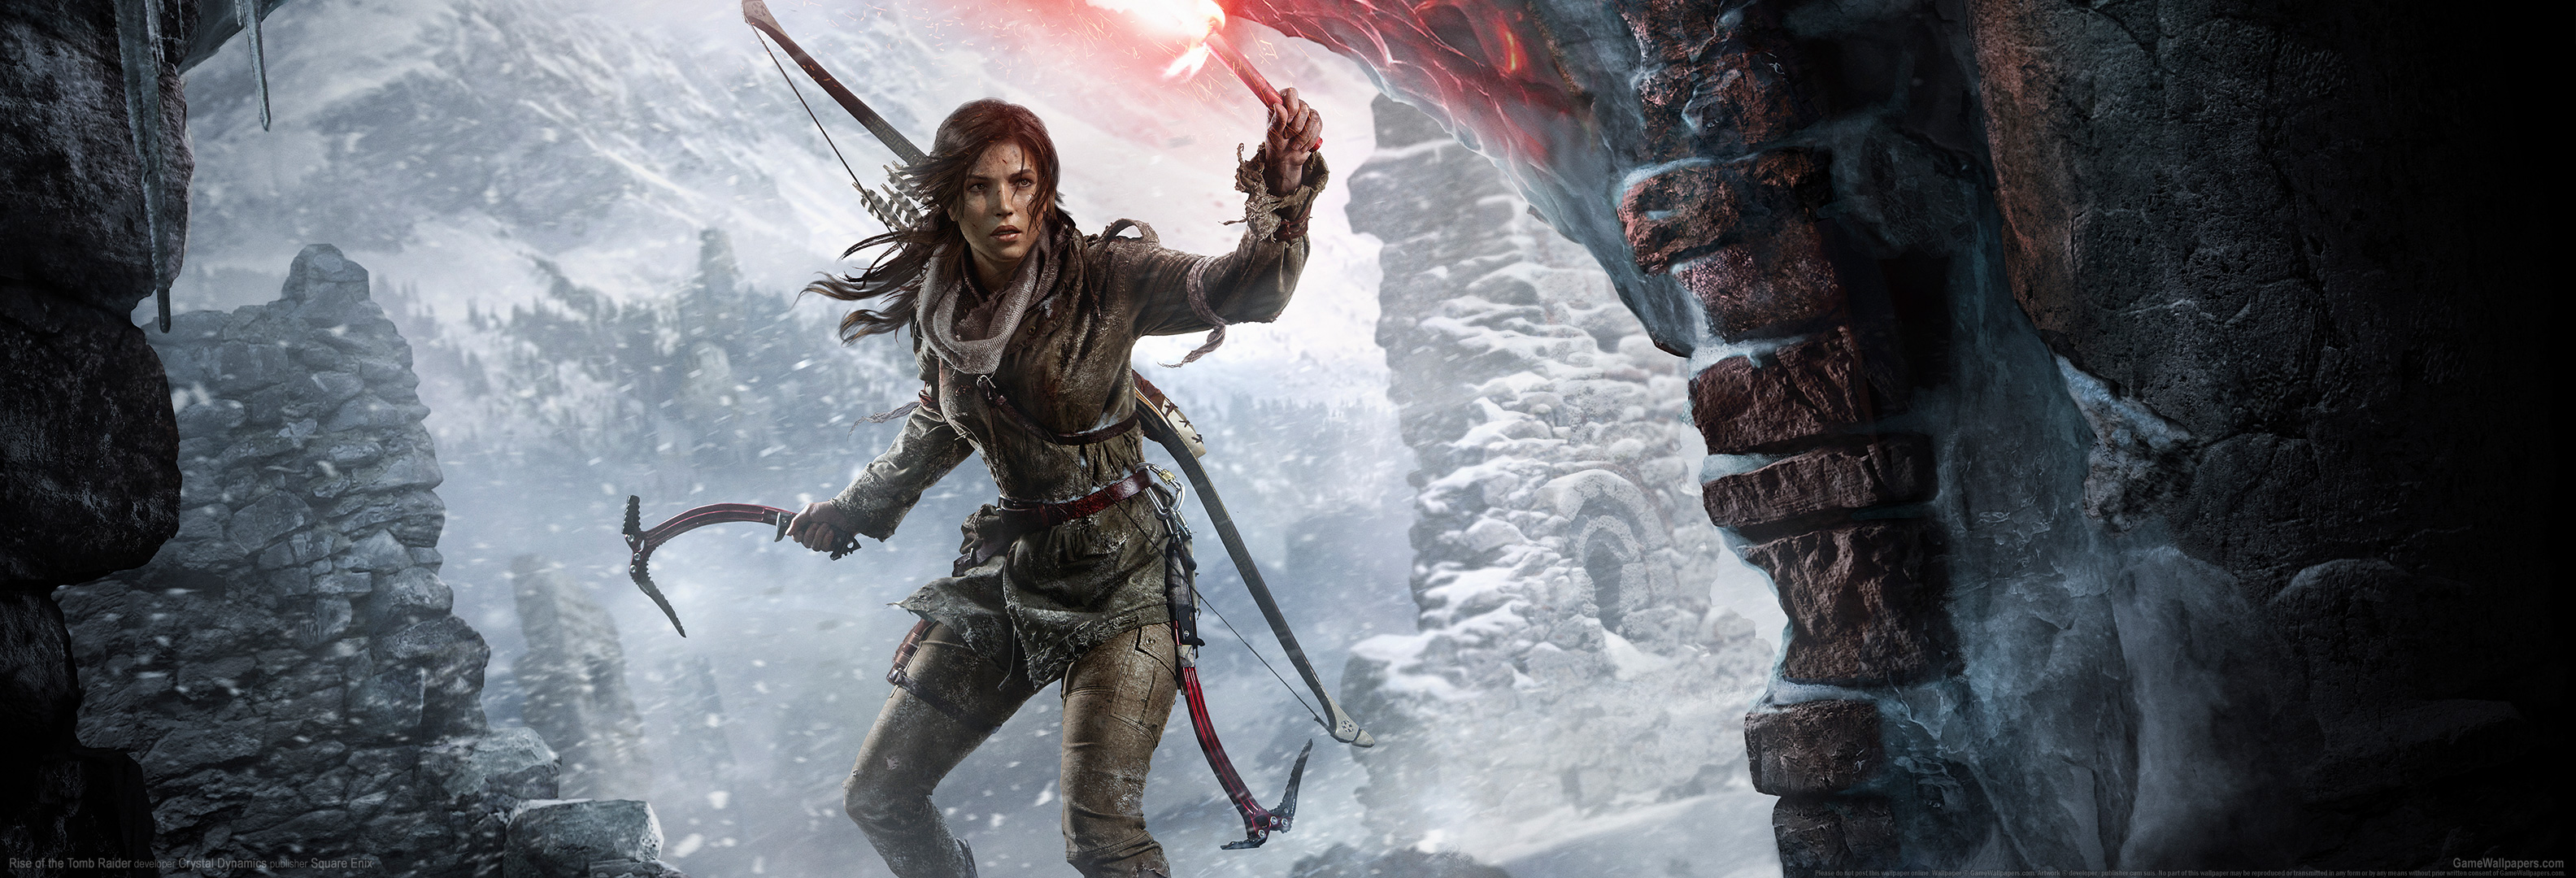 Rise of the Tomb Raider achtergrond 11 3168x1080